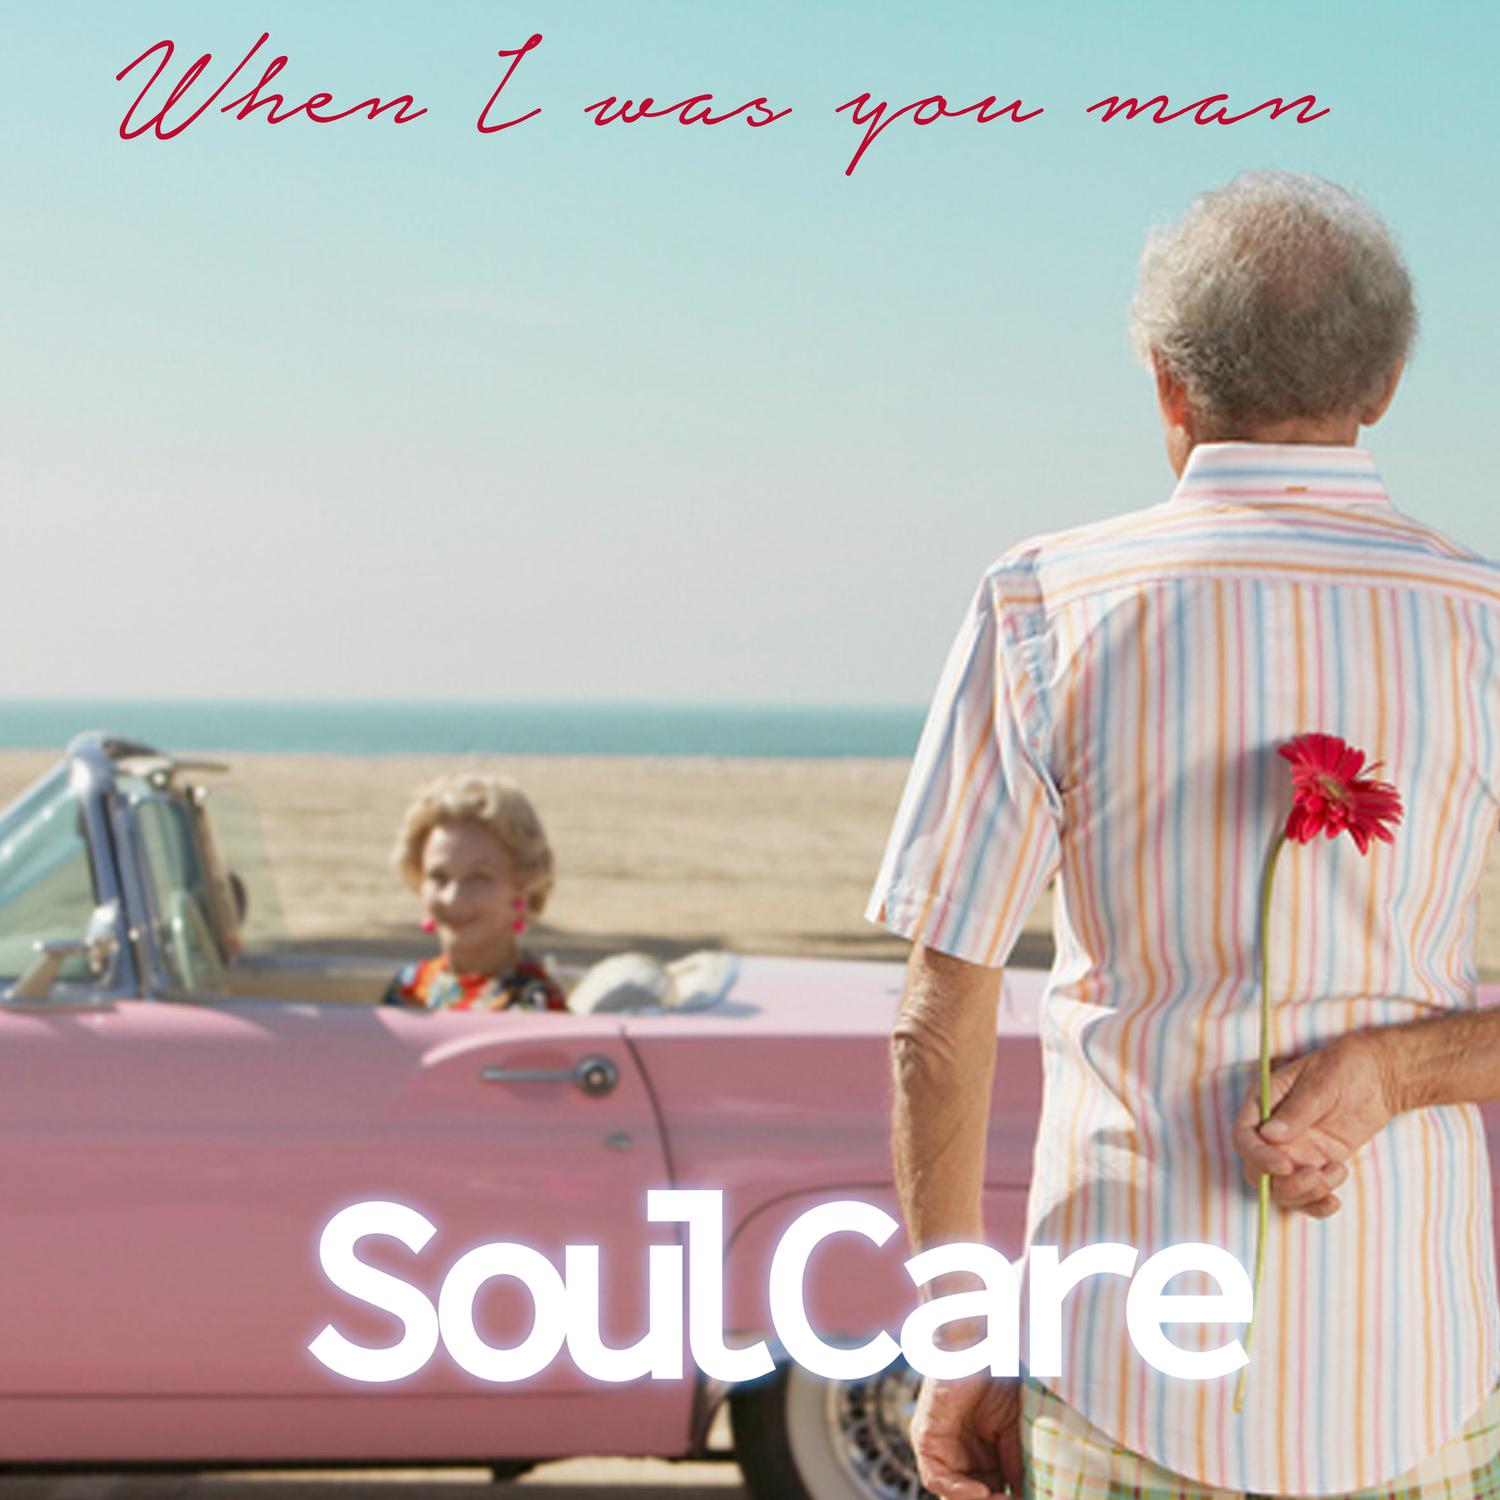 SOULCARE - When I Was Your Man